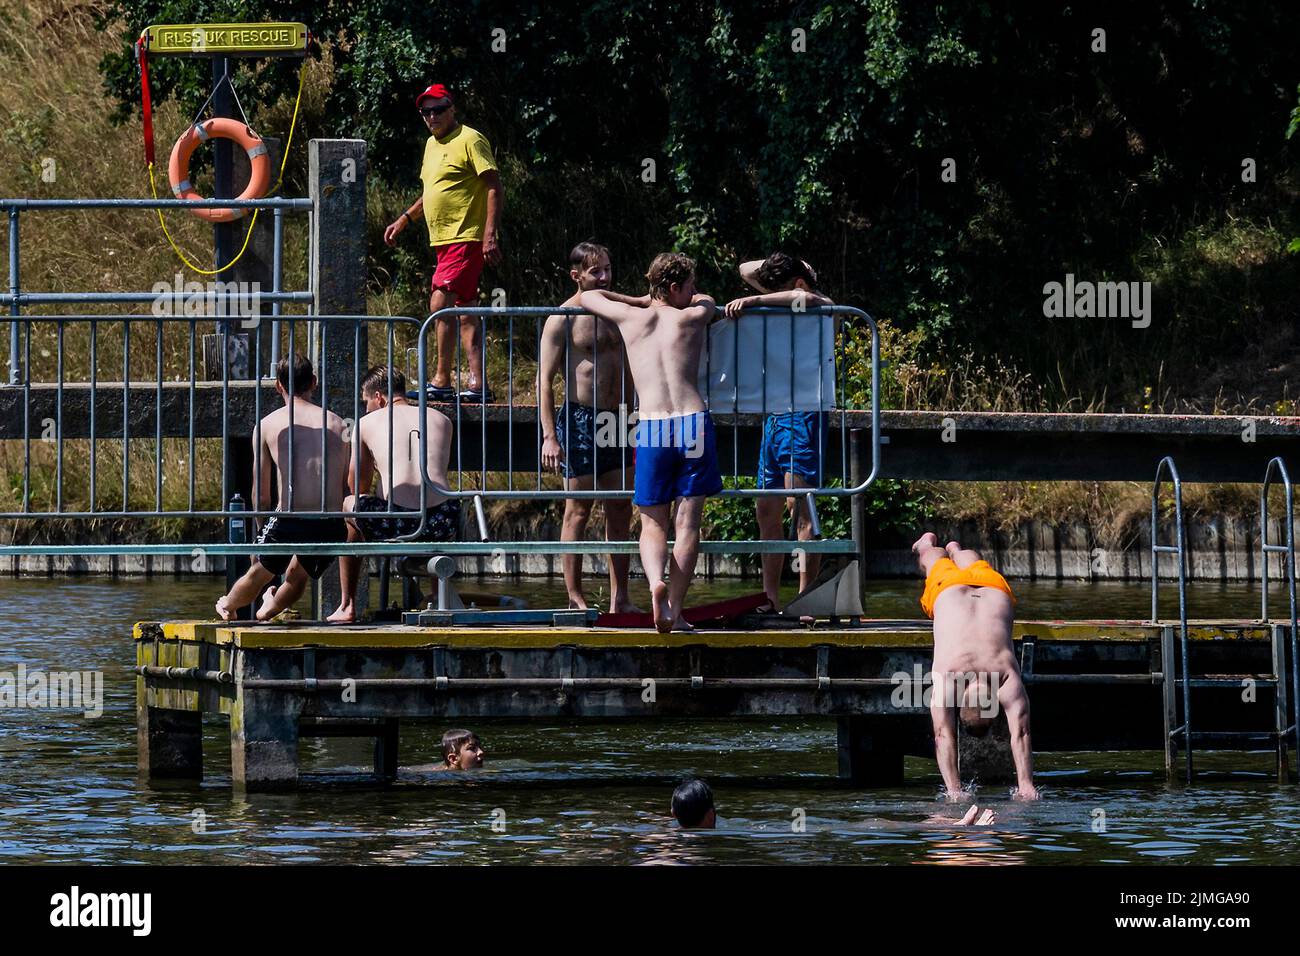 London, UK. 6th Aug, 2022. People dive in to the mens bathing pond to cool off, in stark contrast to the scorched grass on the hillside above - Hot weather continues the drought conditions on Hampstead Heath. Credit: Guy Bell/Alamy Live News Stock Photo